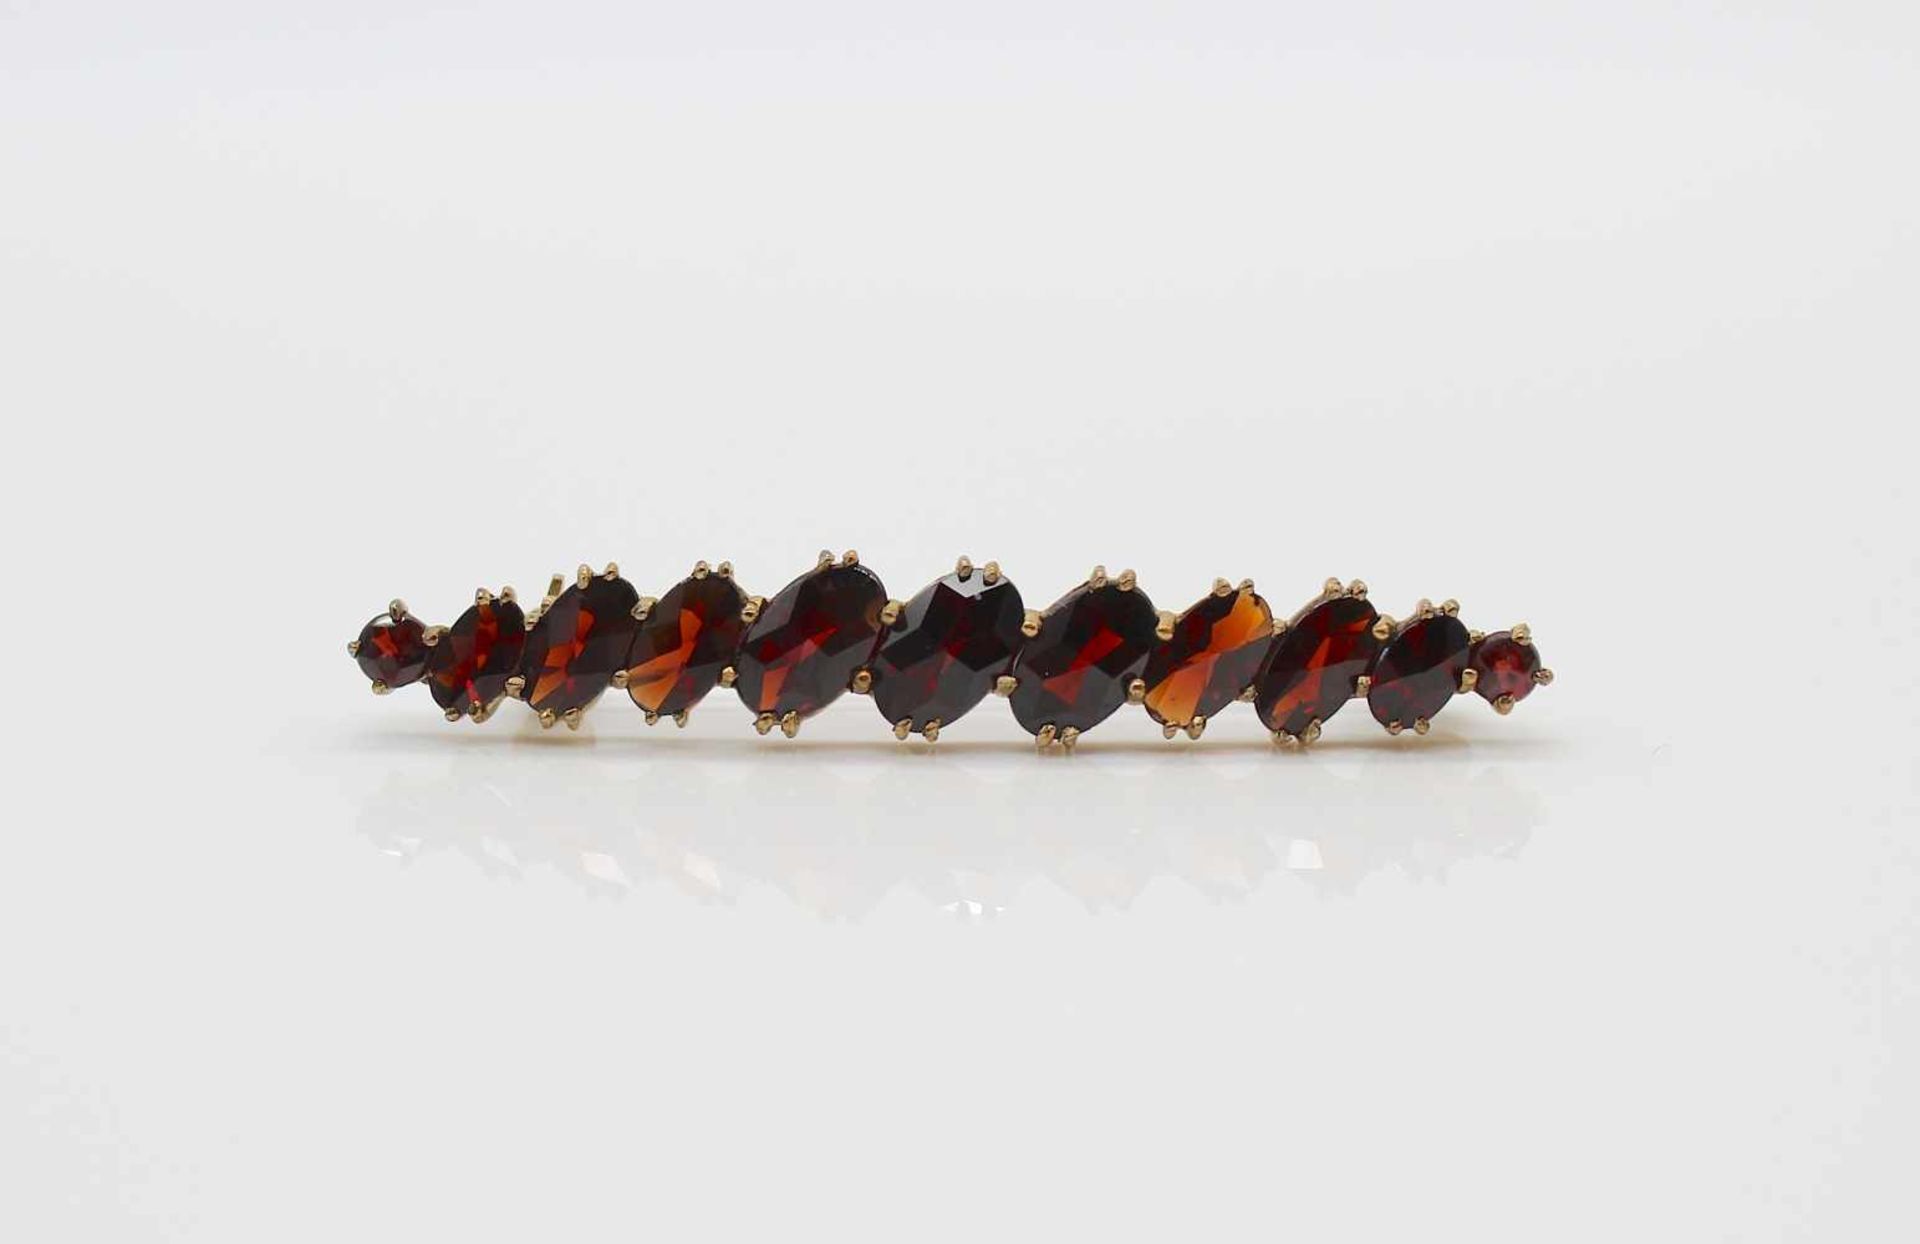 Needle in 333 gold with garnet.Weight 4 g, length 52 mm- - -15.00 % buyer's premium on the hammer